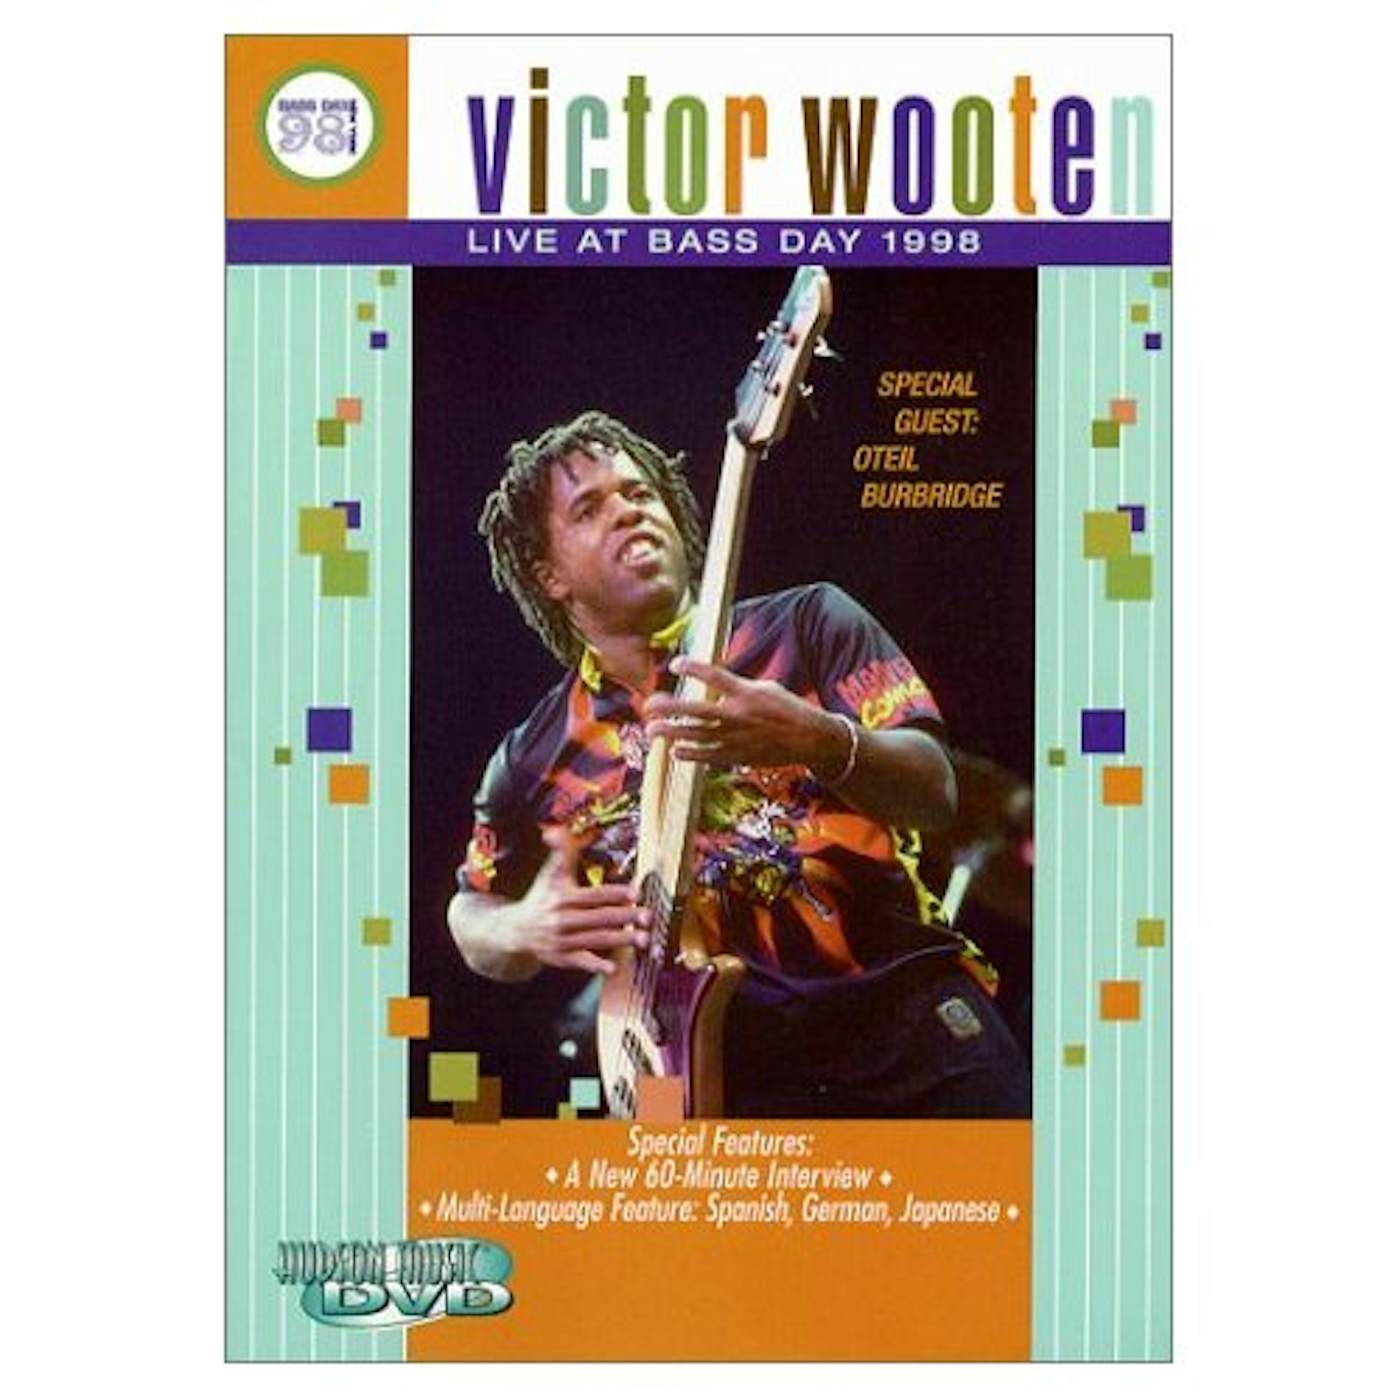 Victor Wooten LIVE AT BASS DAY 98 DVD